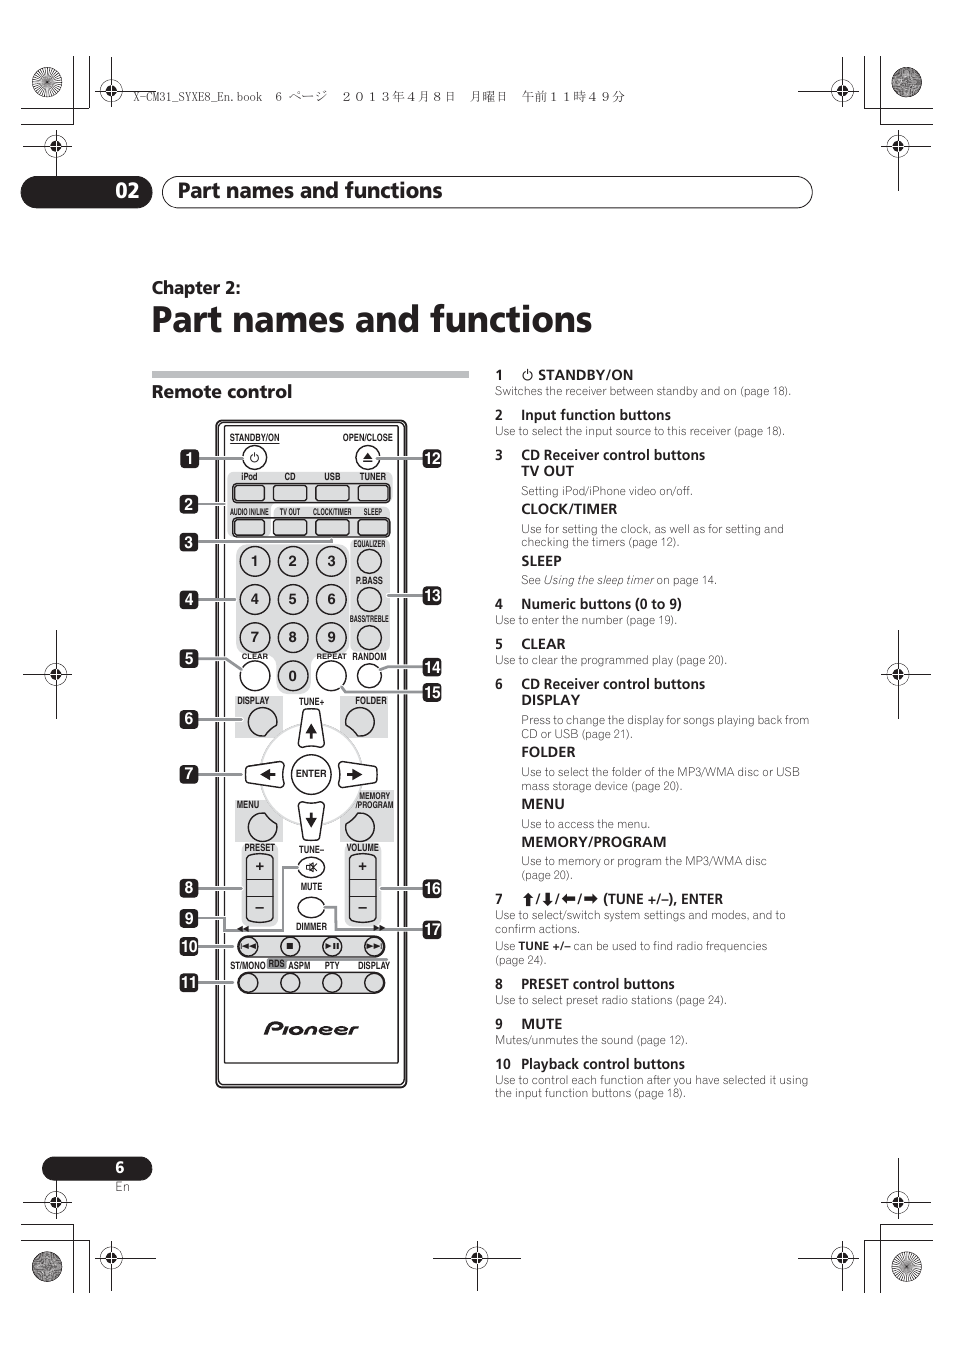 02 part names and functions, Remote control, Part names and